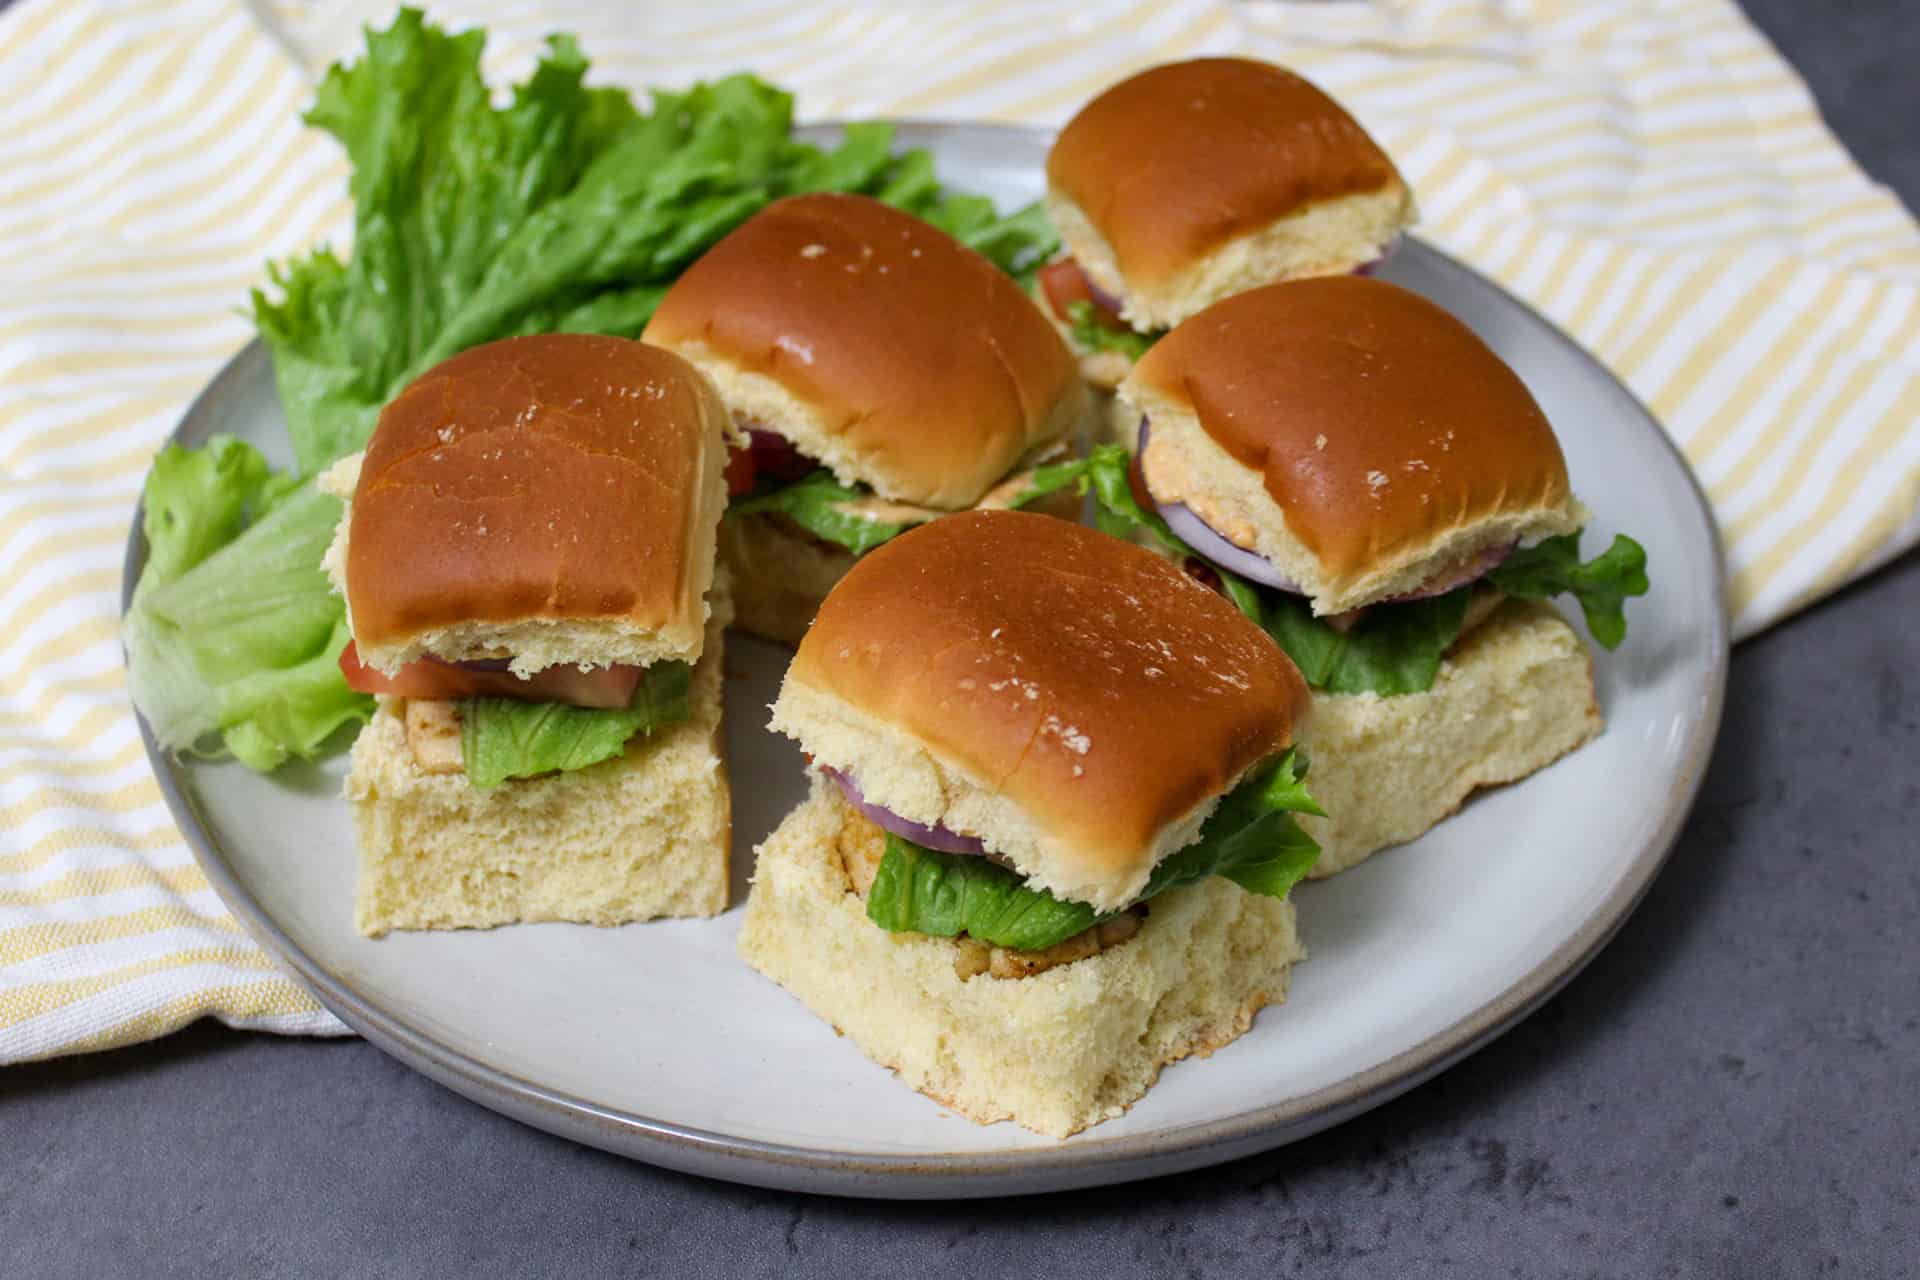 A plate of grilled chicken sliders on brioche buns with lettuce, tomato, and onion